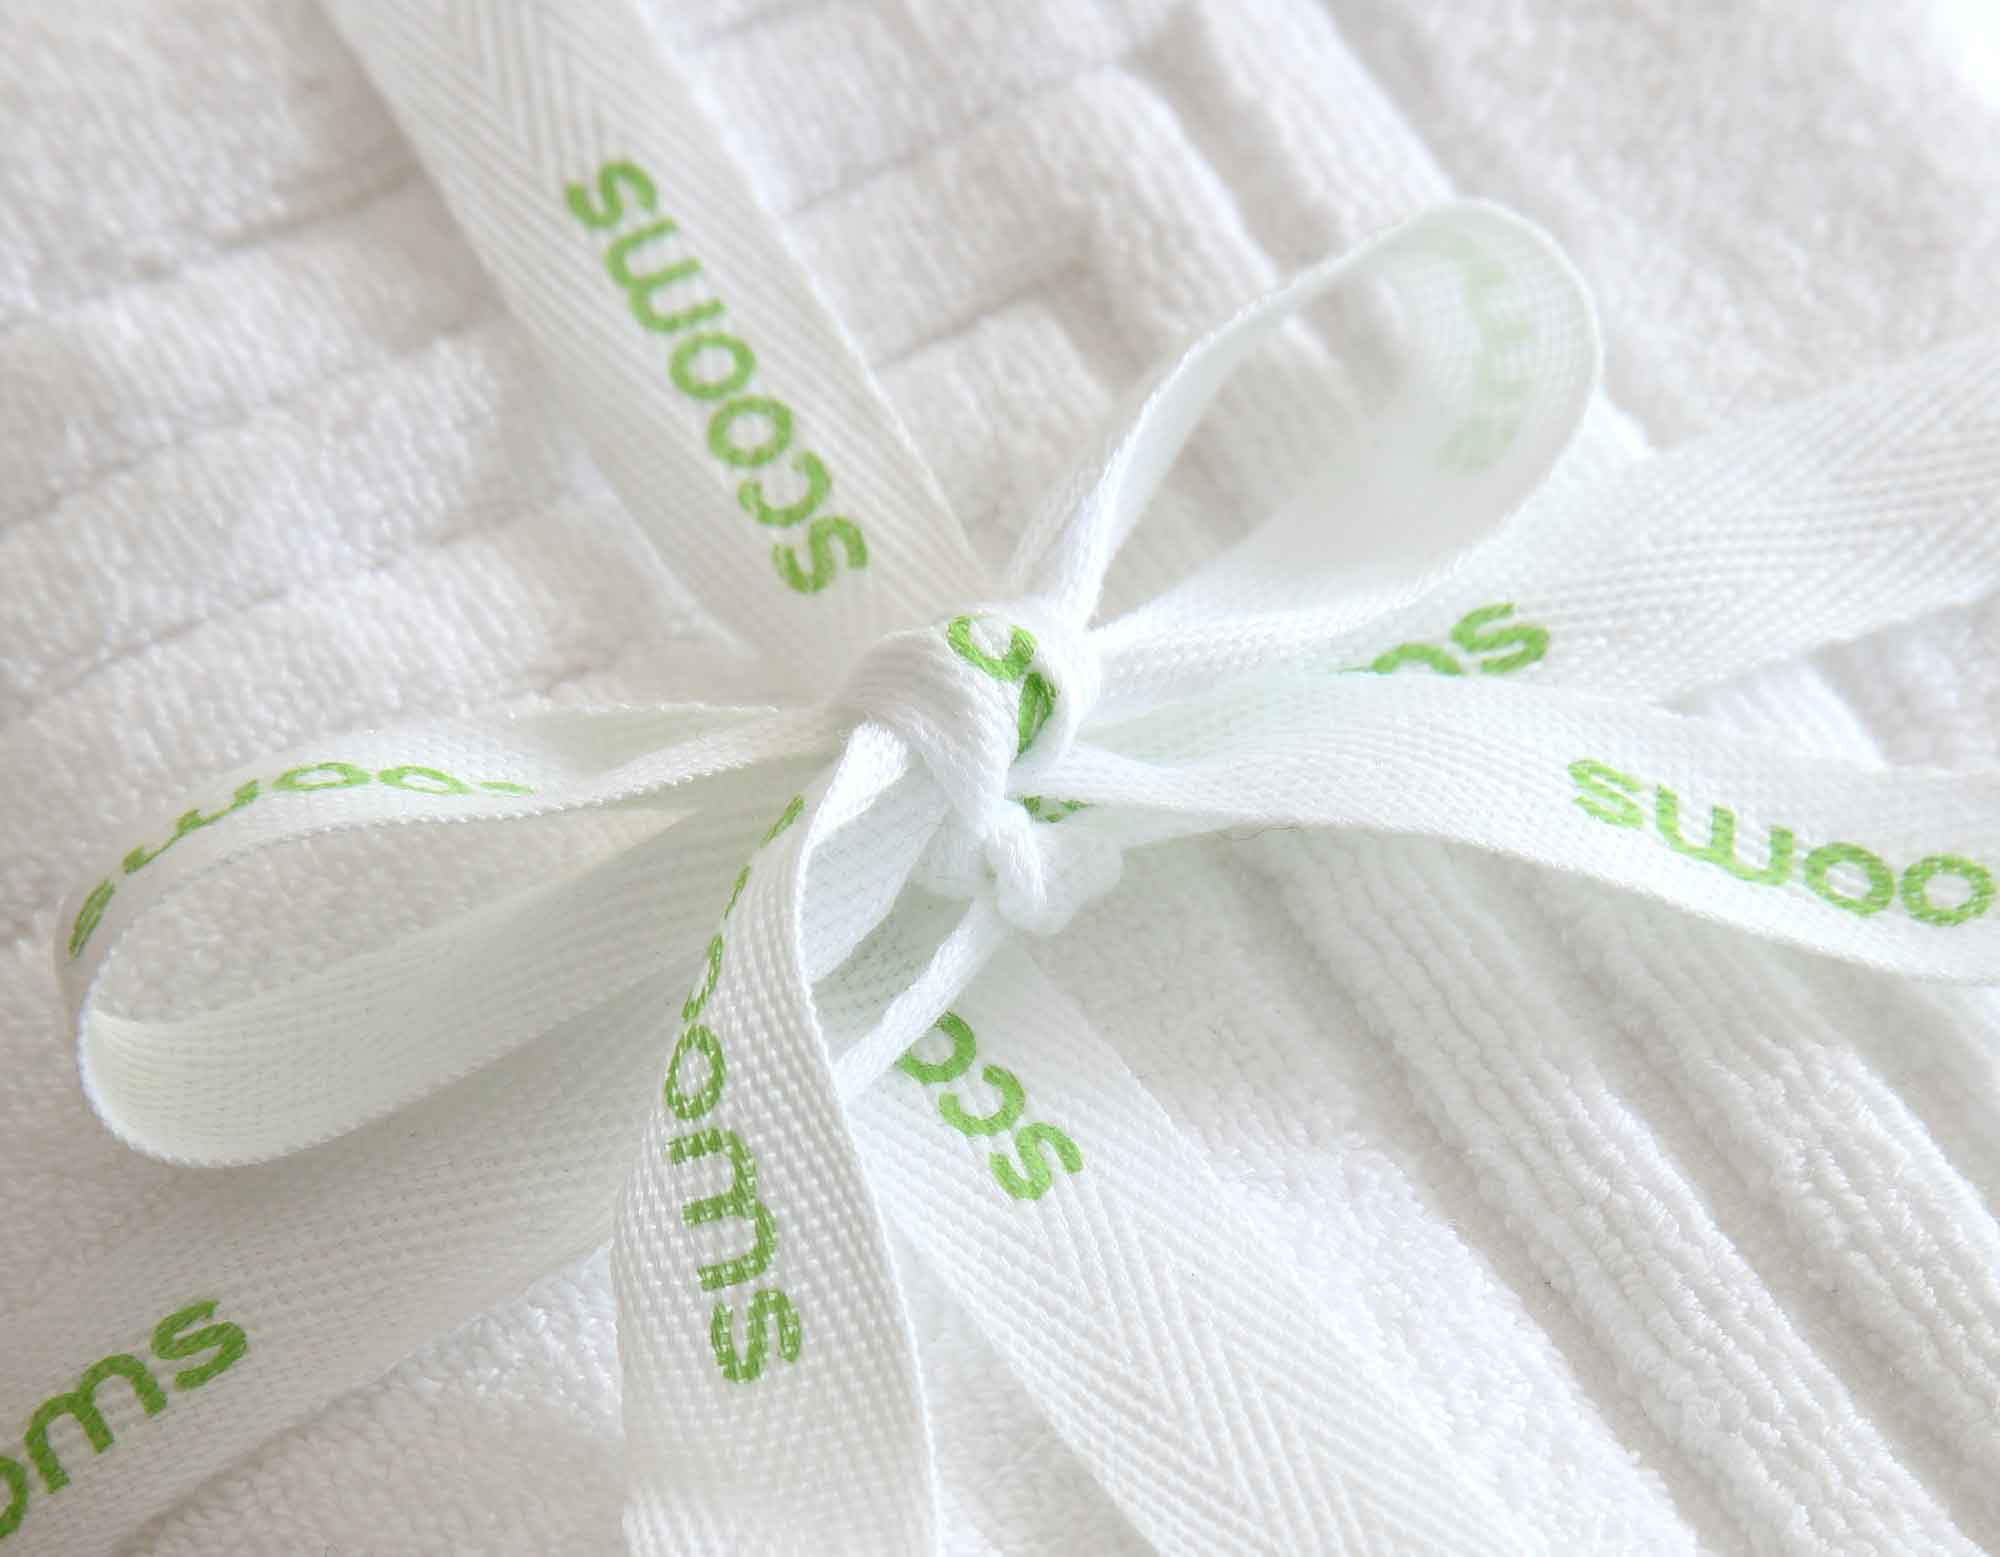 White bath mat close up tied with scooms branded ribbon